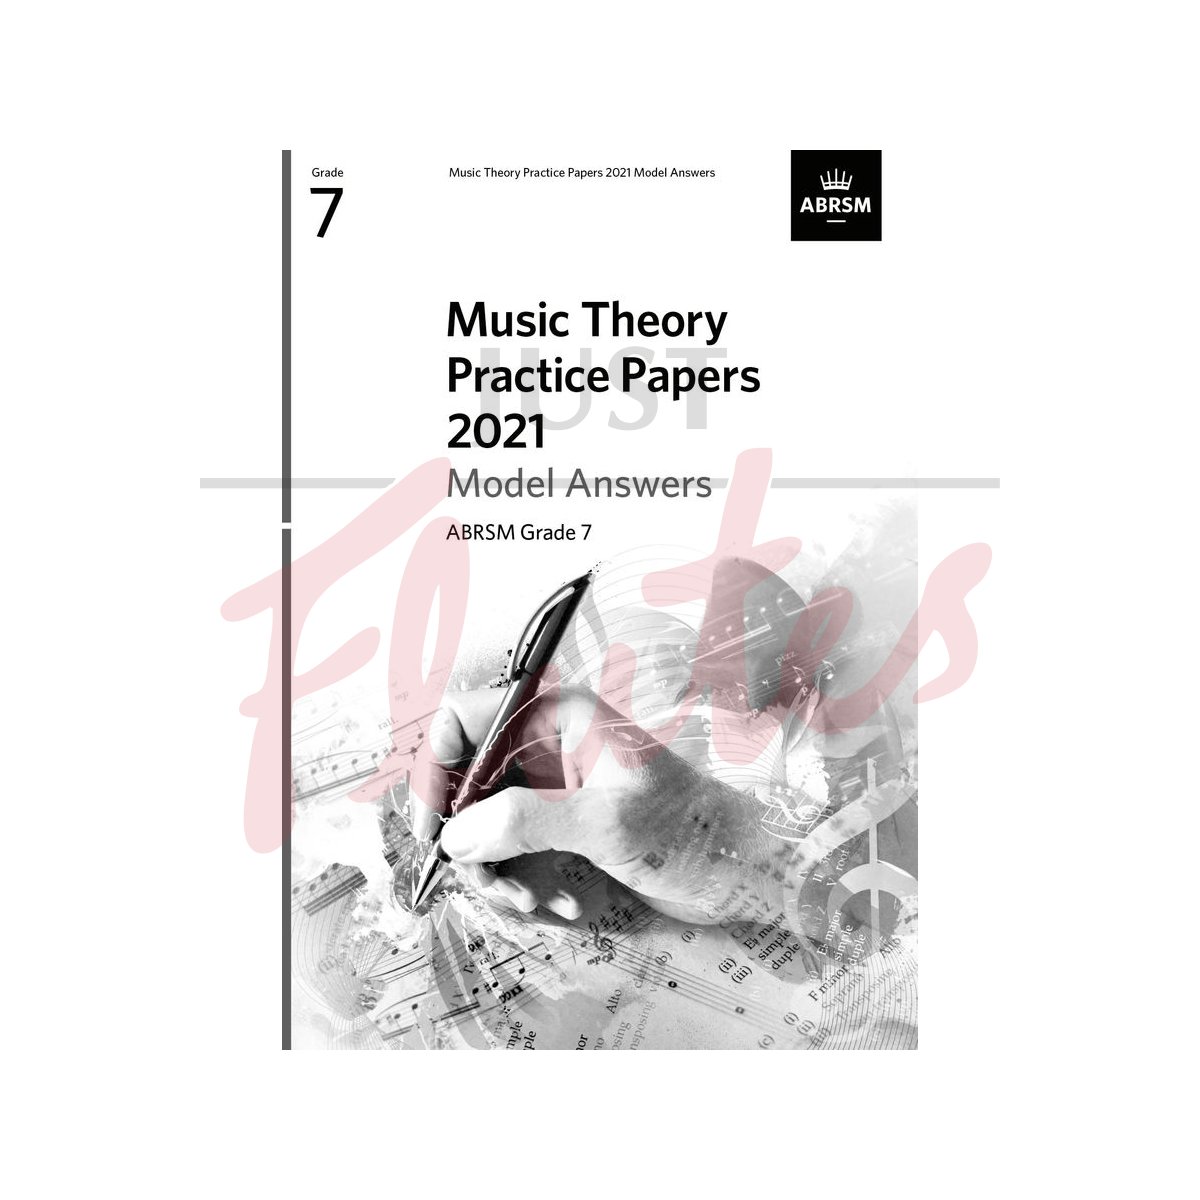 Music Theory Practice Papers 2021 Grade 7 - Model Answers